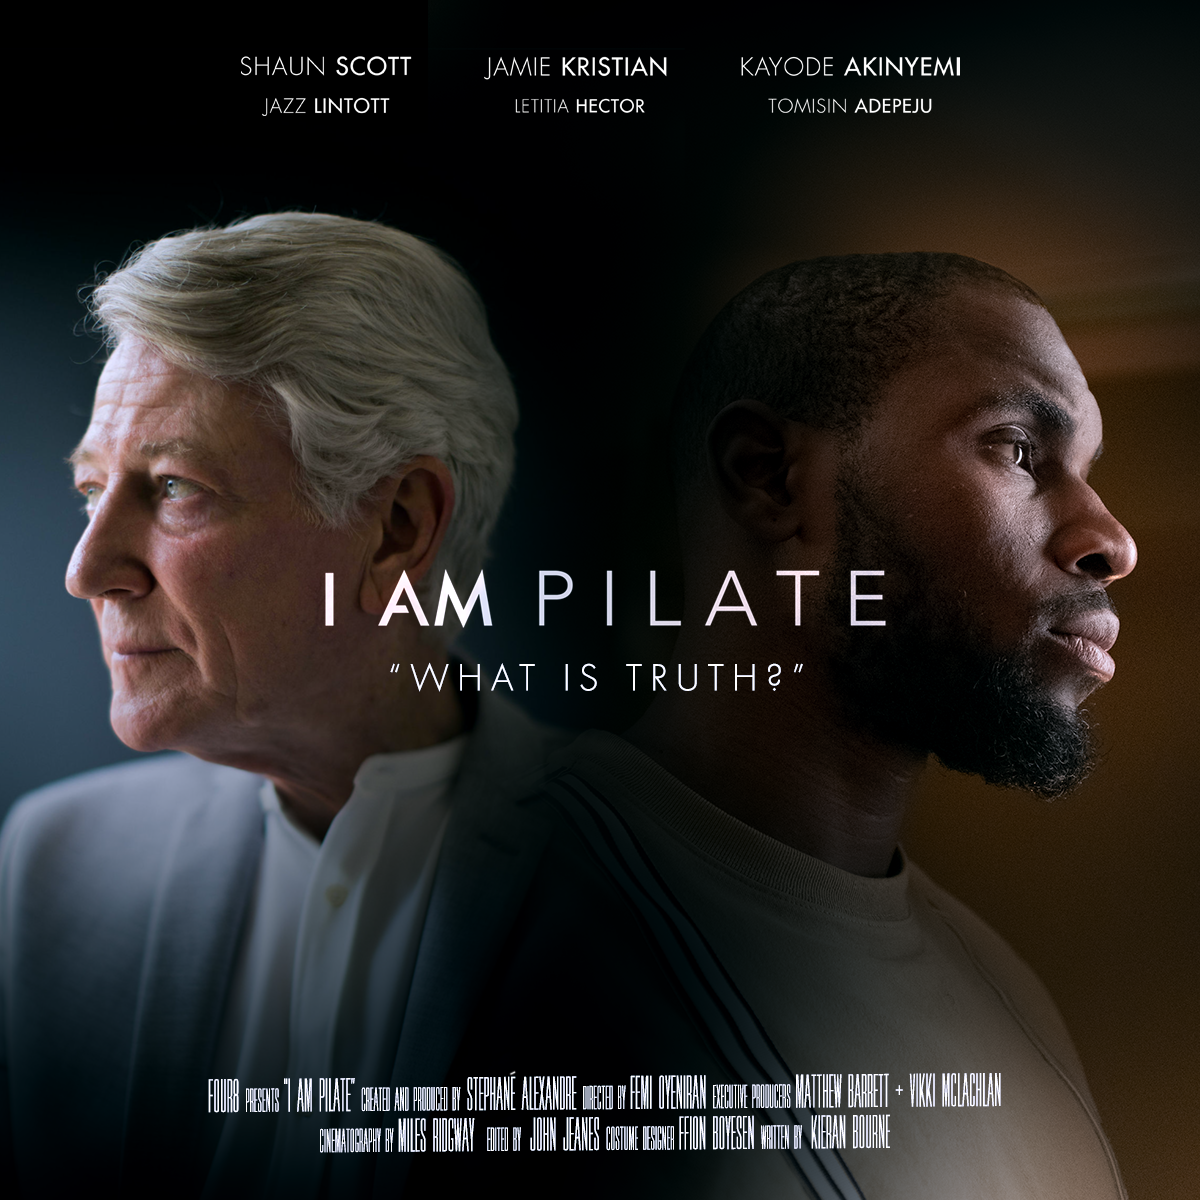 Watch “I AM PILATE” This Easter Sunday!